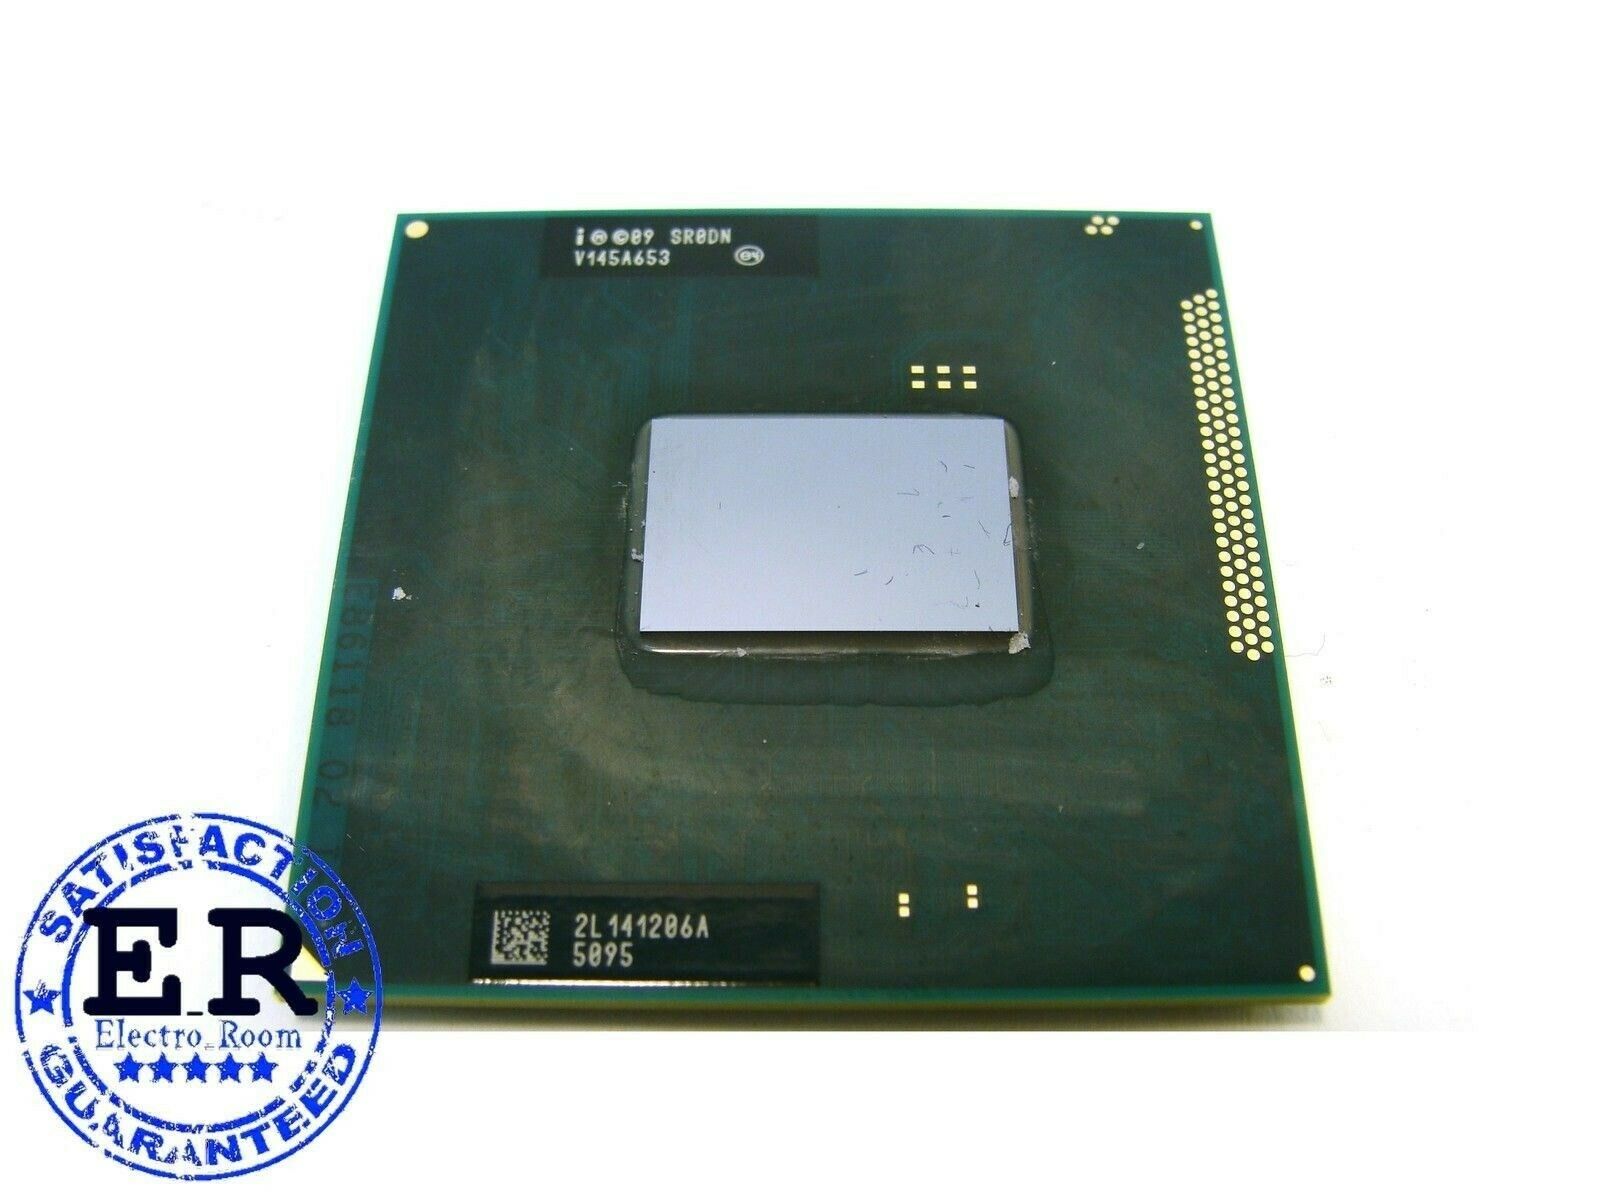 Intel mobile Core i3-2350M (SR0DN) 2.3 GHz dual-core with HT socket G2 CPU - Laptop Parts - Buy Authentic Computer Parts - Top Seller Ebay